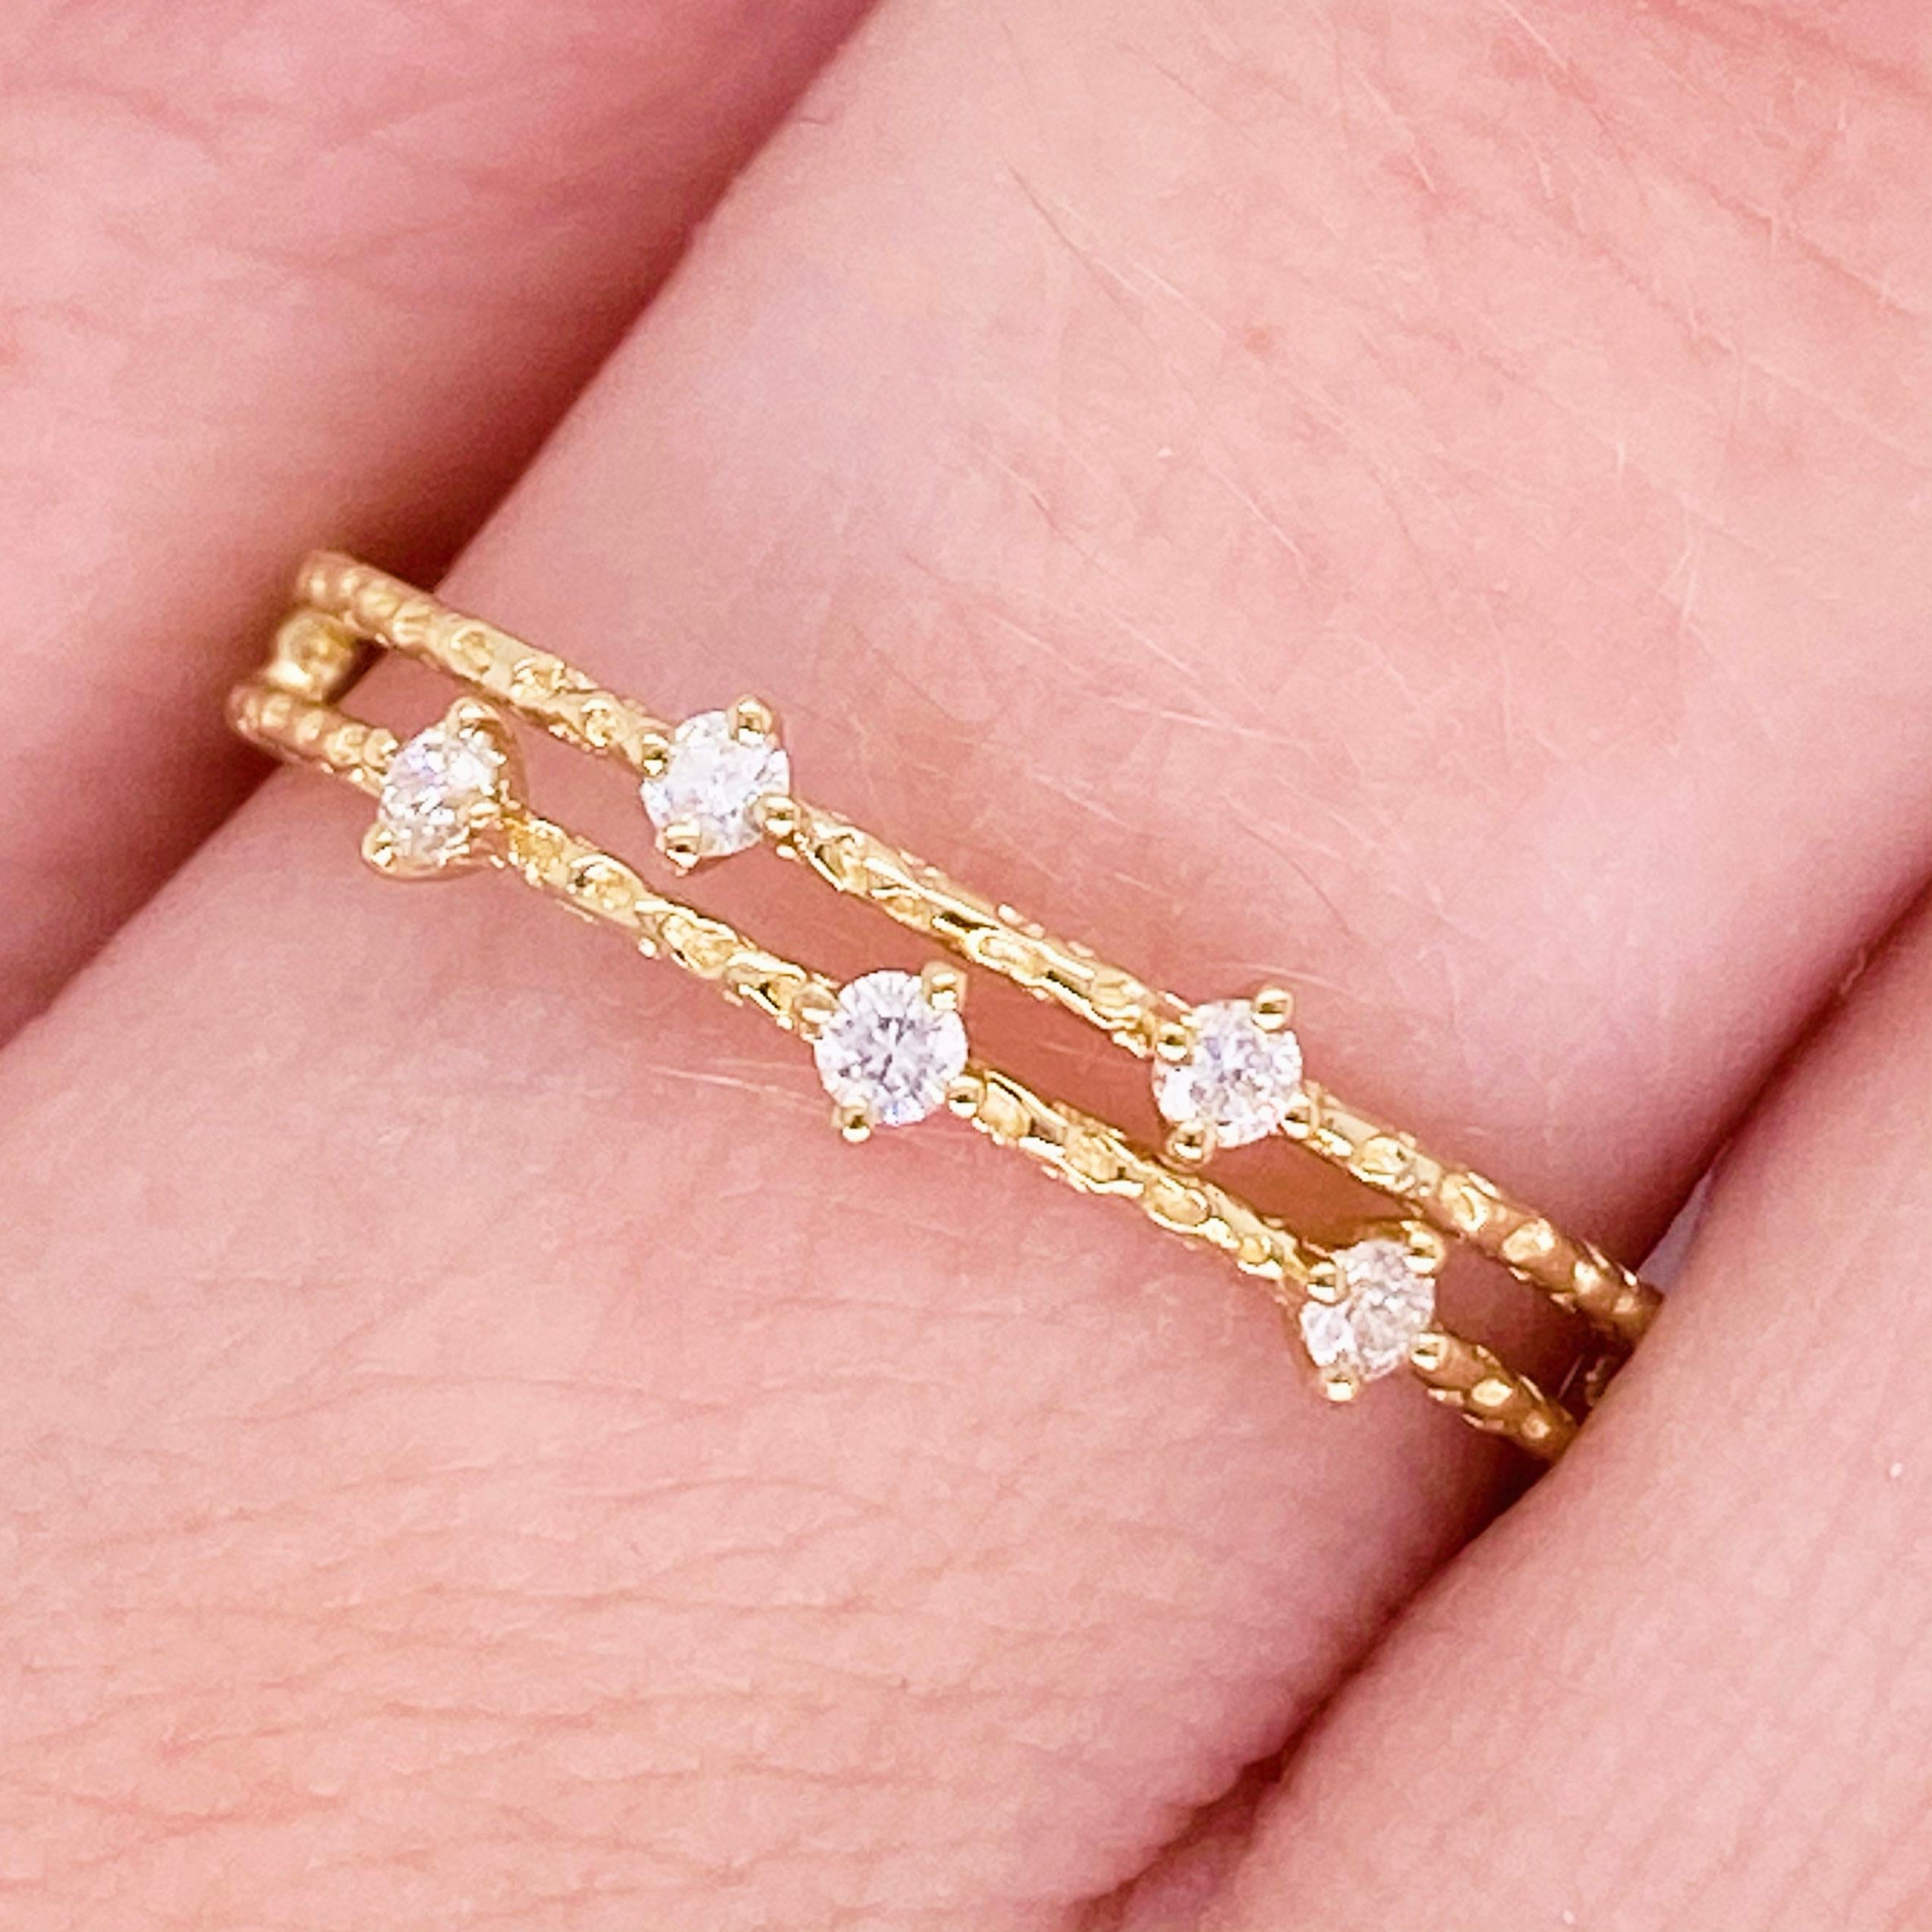 This lovely diamond band has two gorgeous detailed rows of diamonds! Accented by lovely 14 karat yellow gold, this ring is an amazing fashion band and stackable band!  This pairs well with most engagement rings and wedding bands as well!  Treat